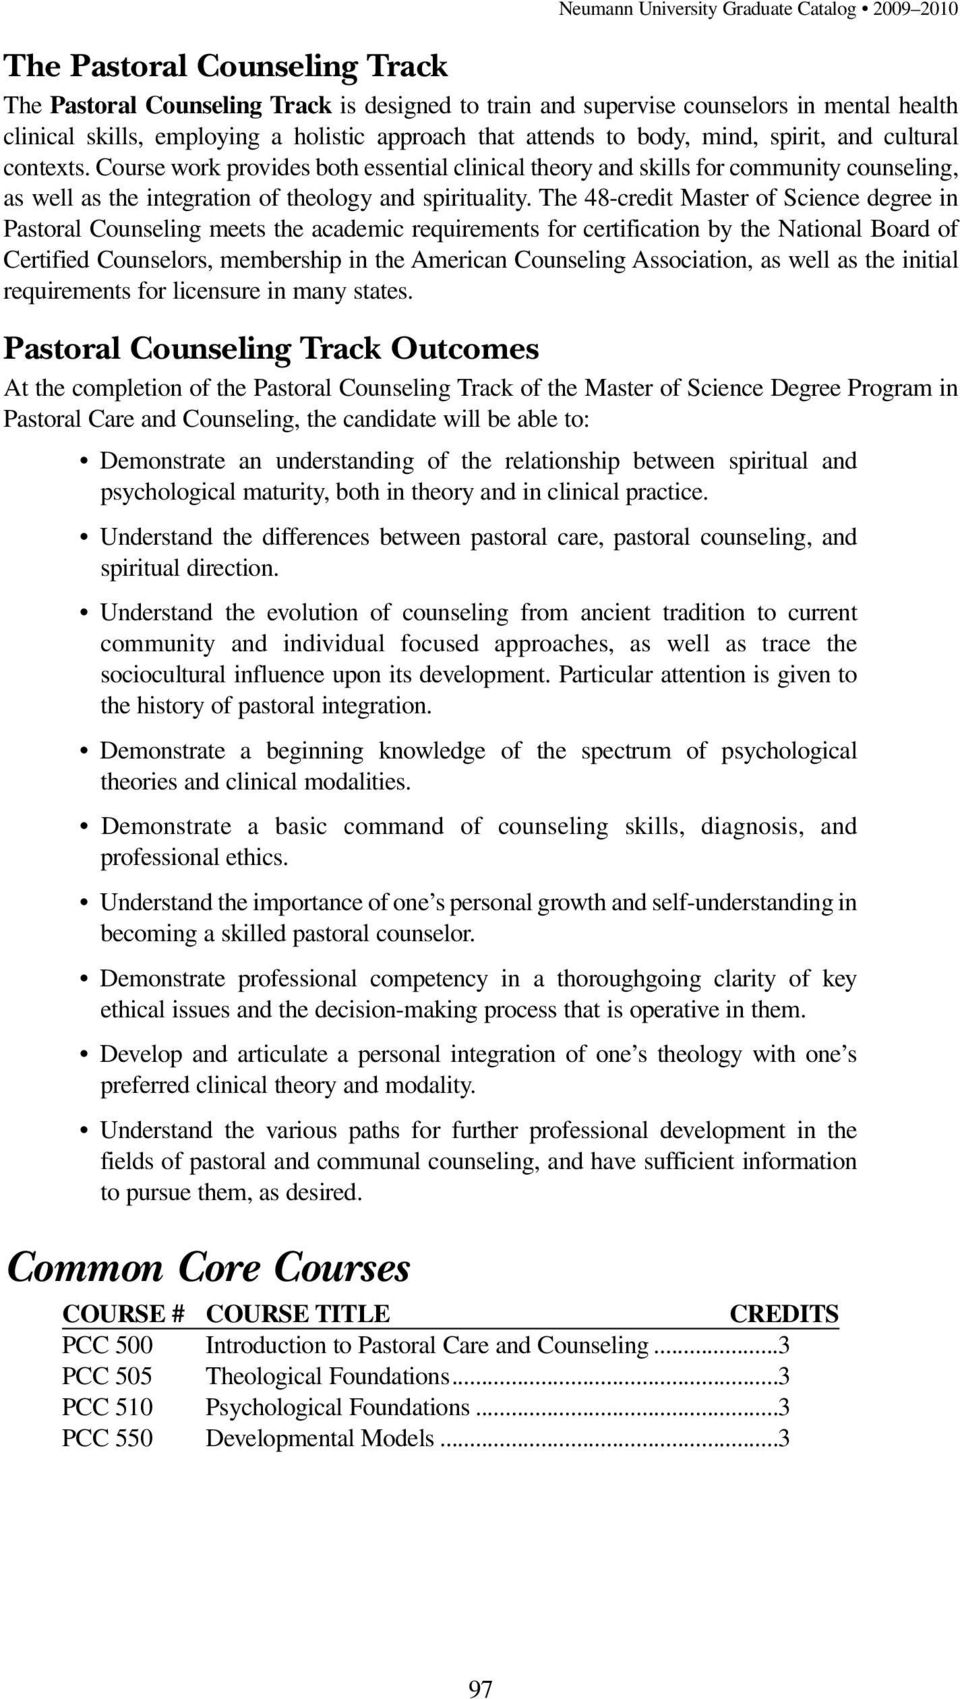 The 48-credit Master of Science degree in Pastoral Counseling meets the academic requirements for certification by the National Board of Certified Counselors, membership in the American Counseling